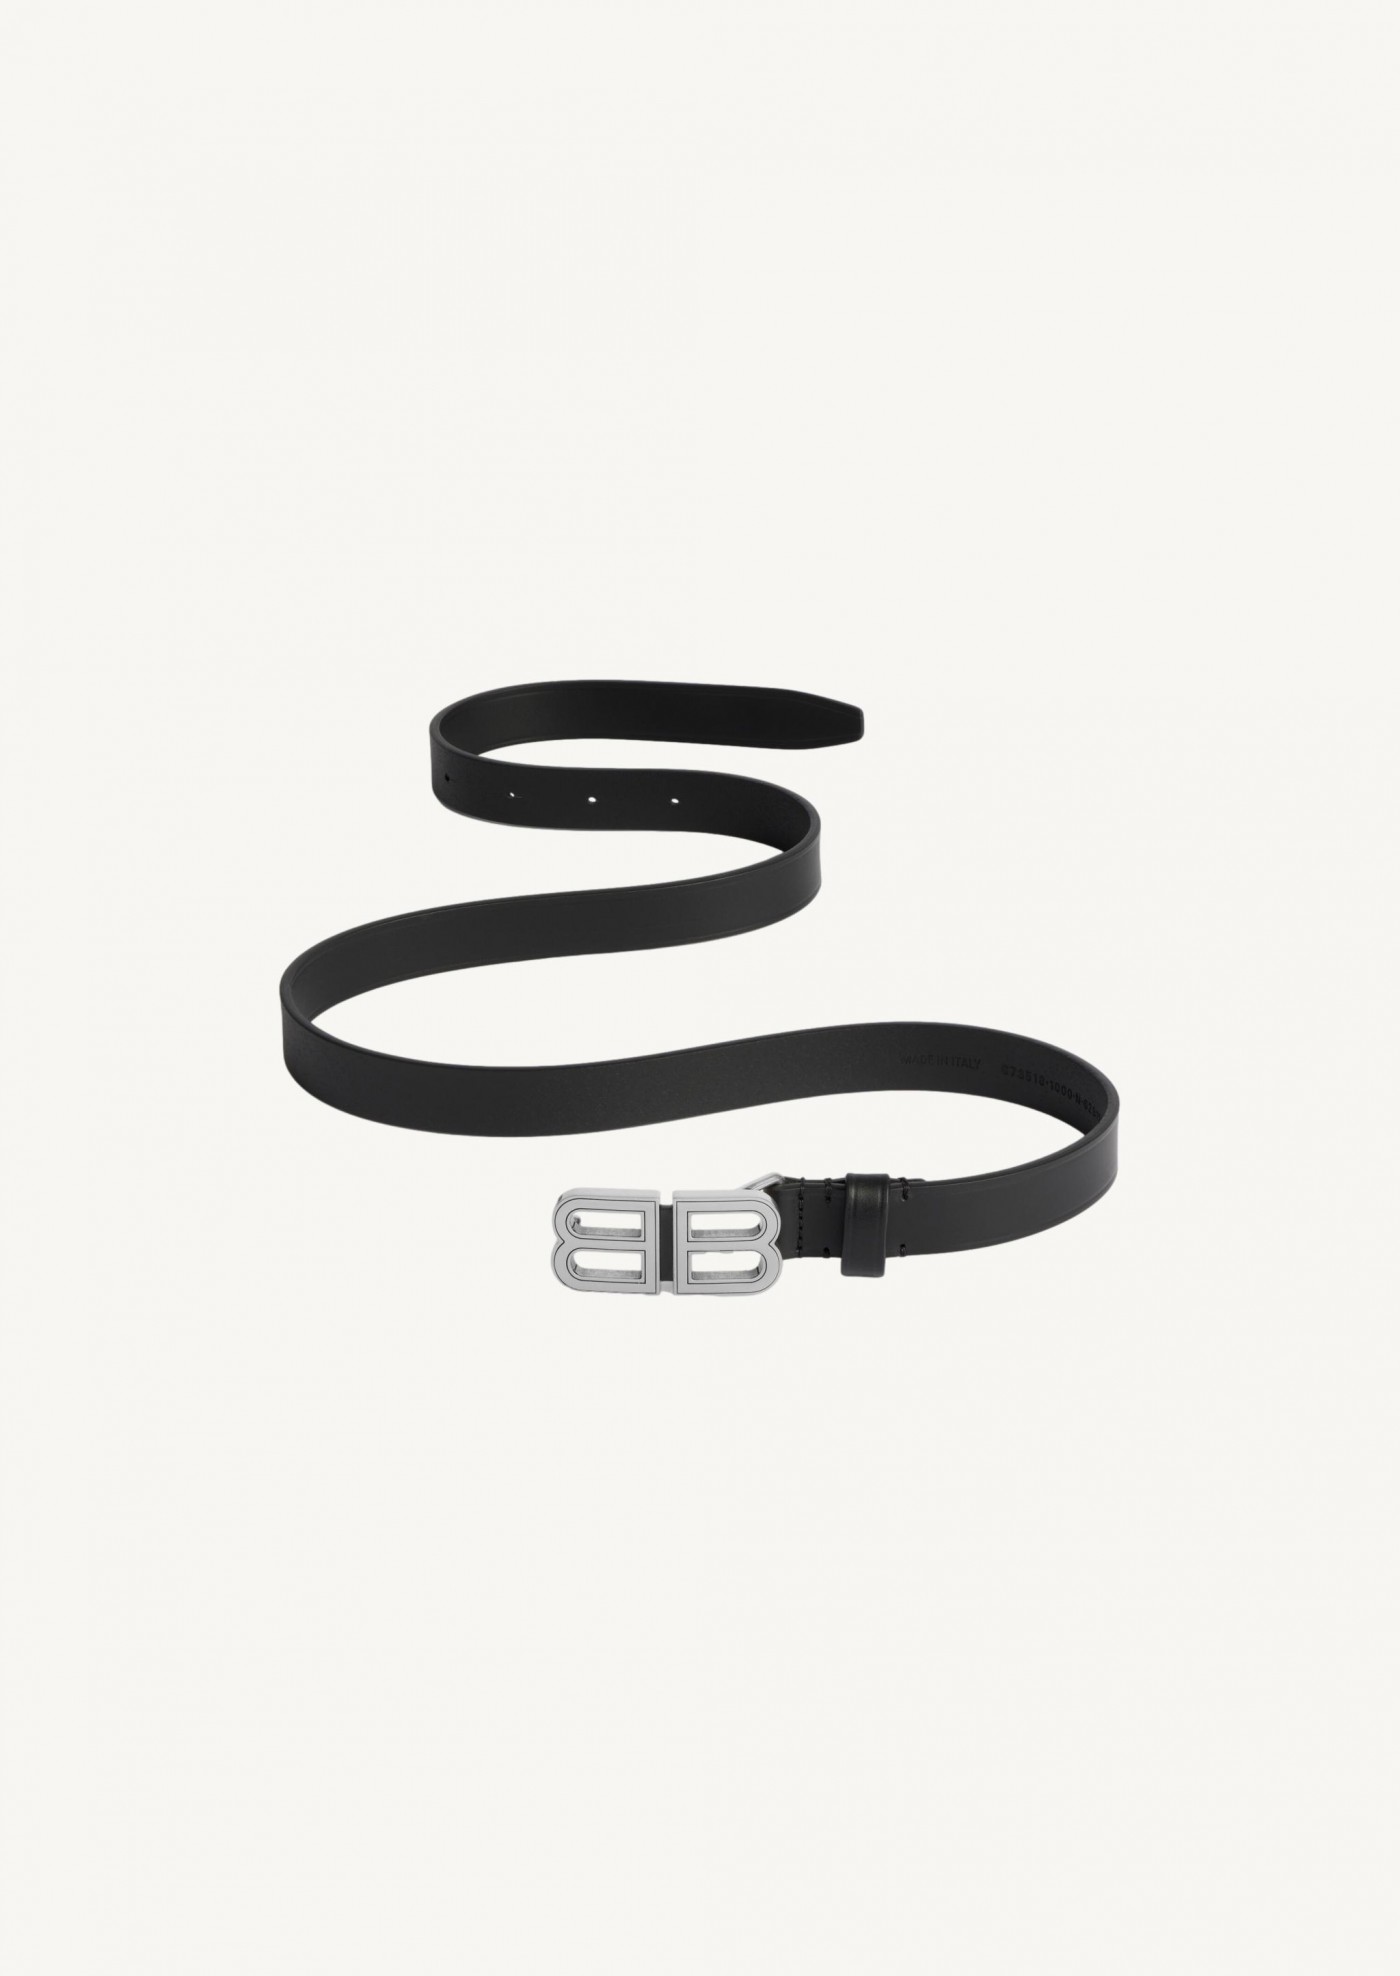 BB hourglass thin belt in black and silver